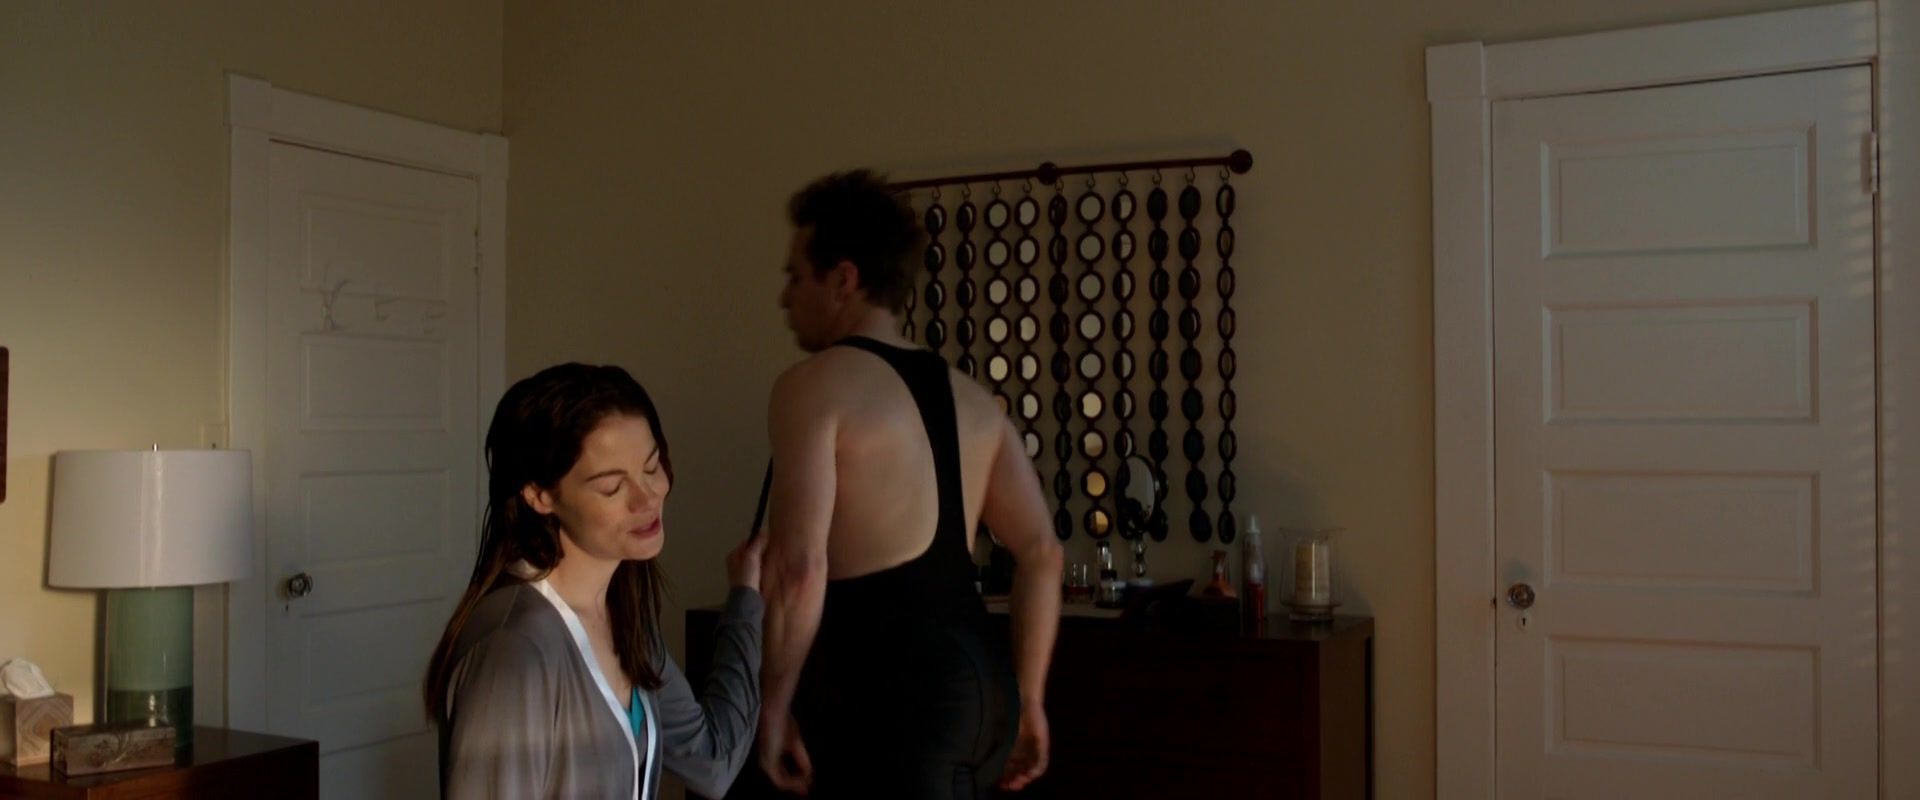 Gang Sexy Olivia Wilde, Michelle Monaghan nude - Better Living Through Chemistry (2014) Bigblackcock - 1